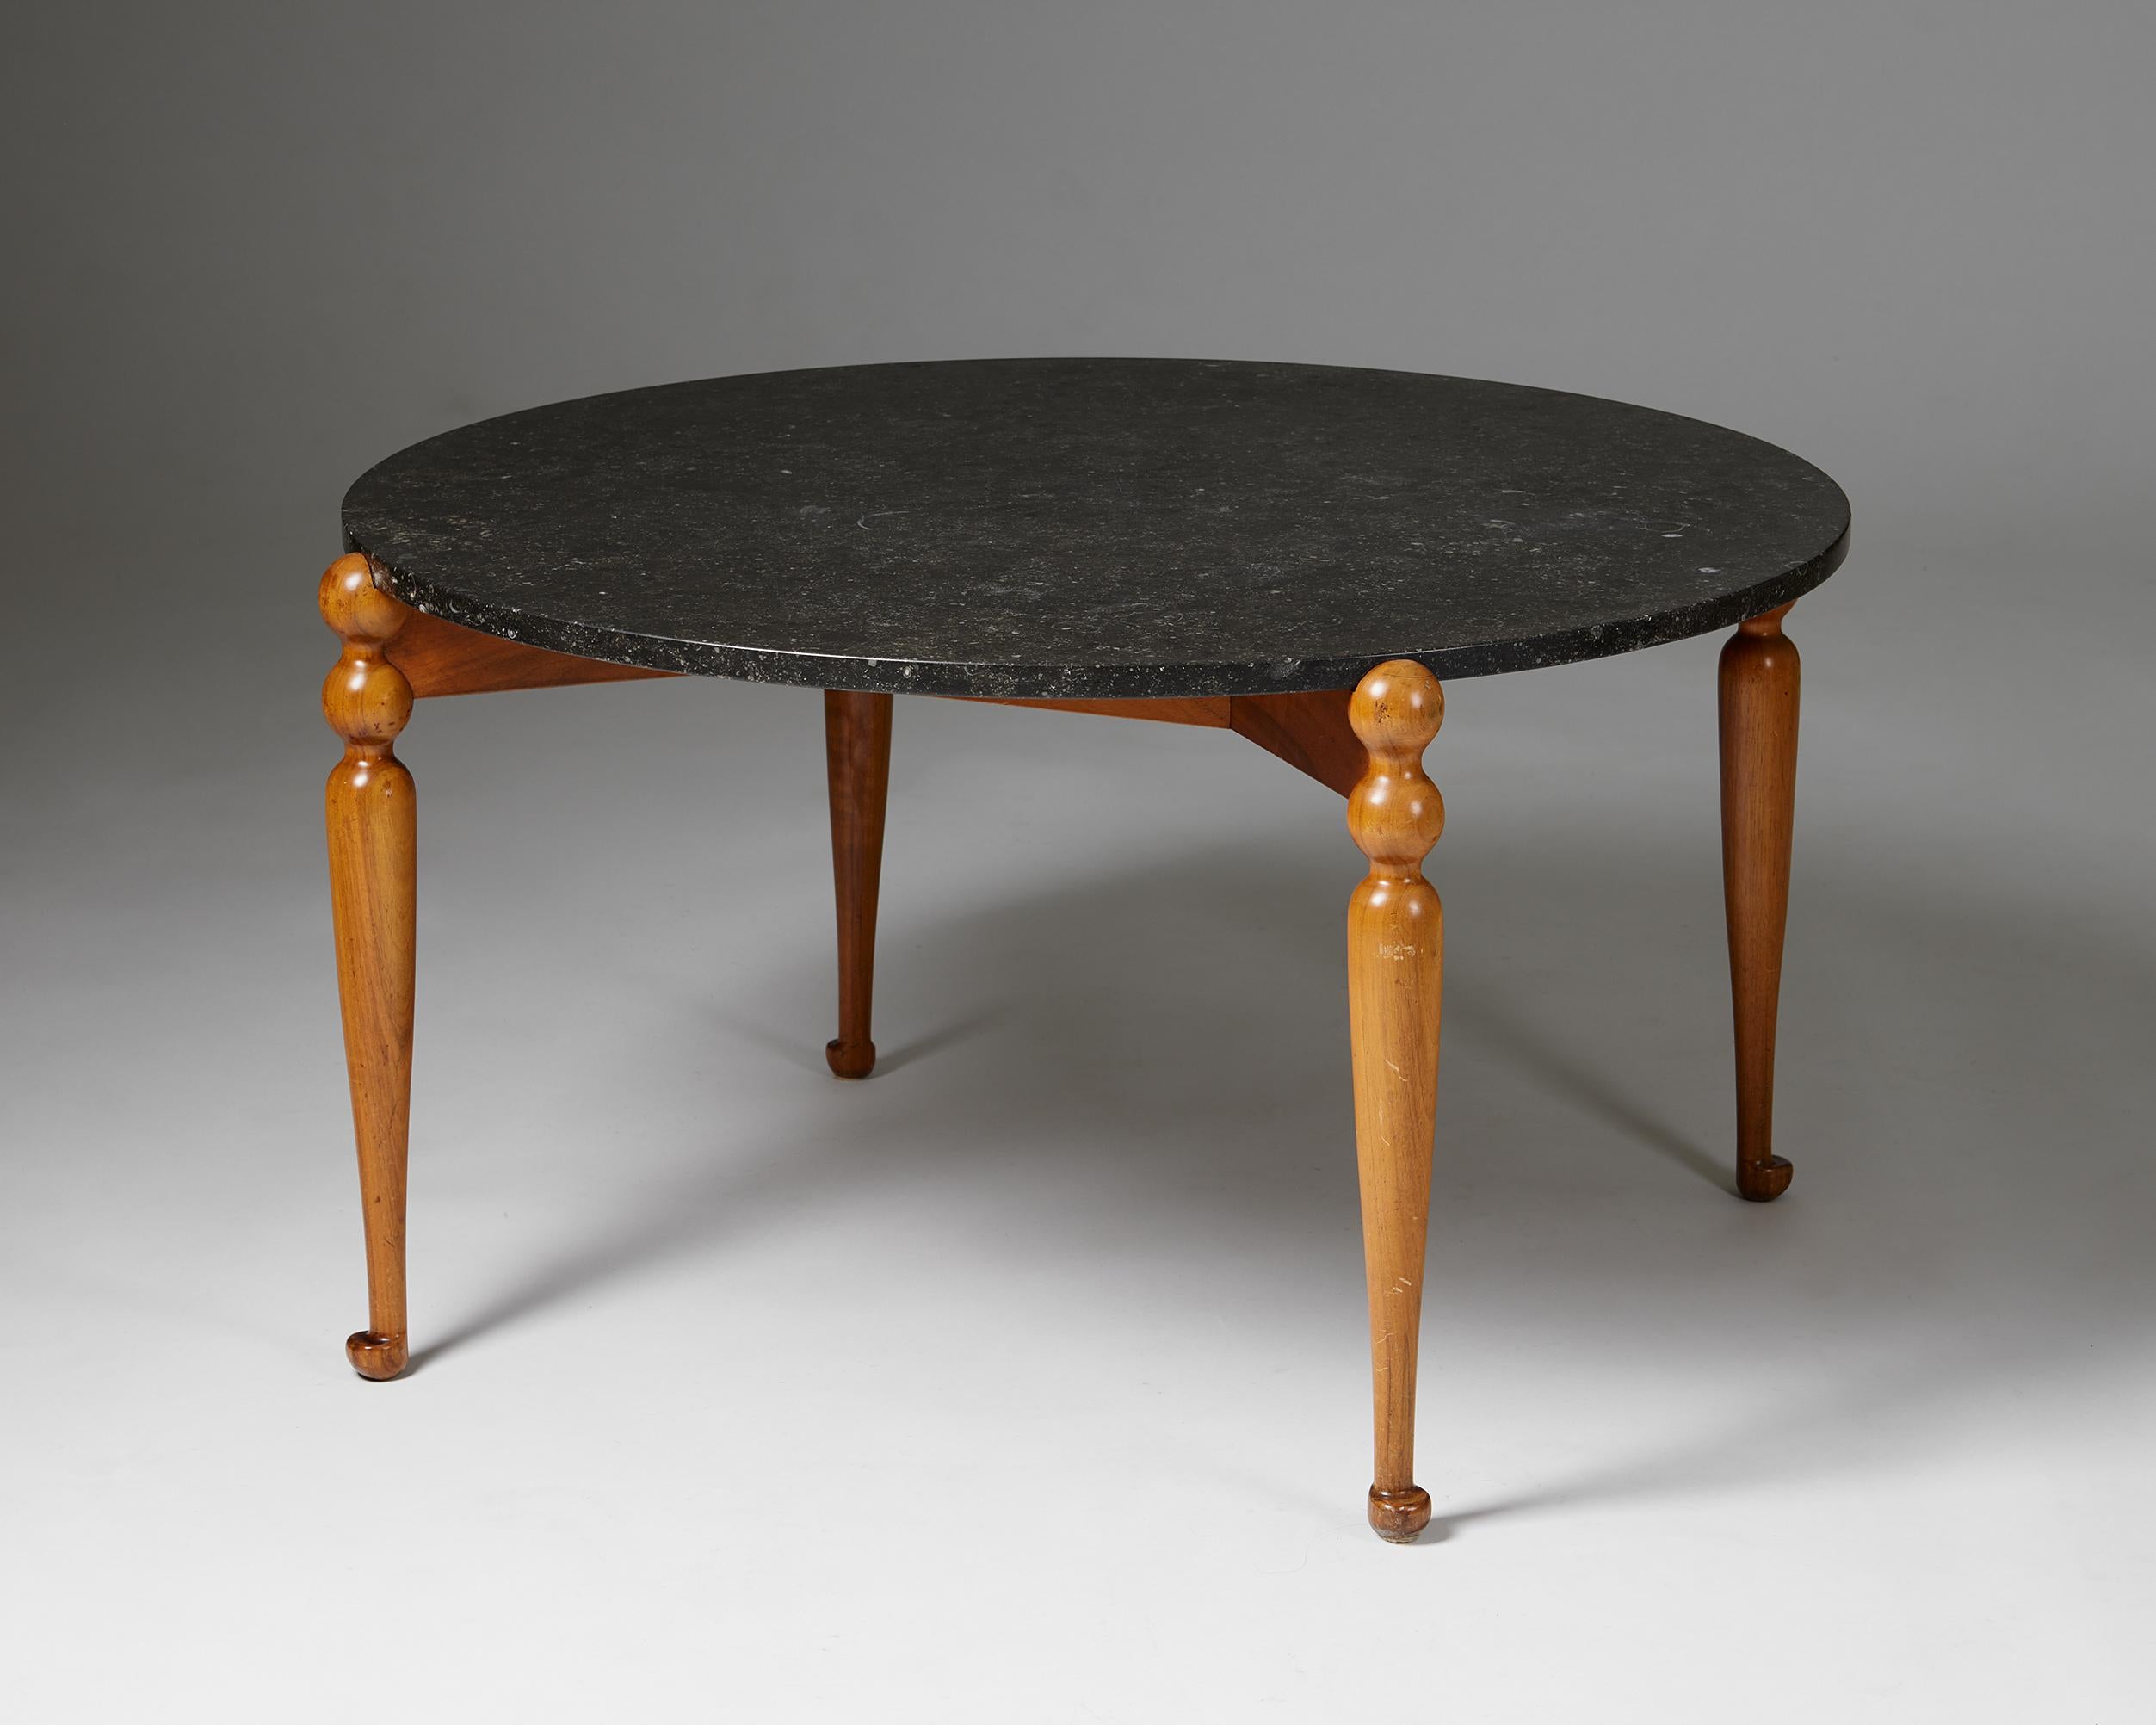 Occasional table model 2168 designed by Josef Frank for Svenskt Tenn,
Sweden. 1950s.

Walnut and marble.

Josef Frank’s occasional table “model 2168” is one of his rarer models. Its beautifully carved, turned legs give it a lighter and more playful